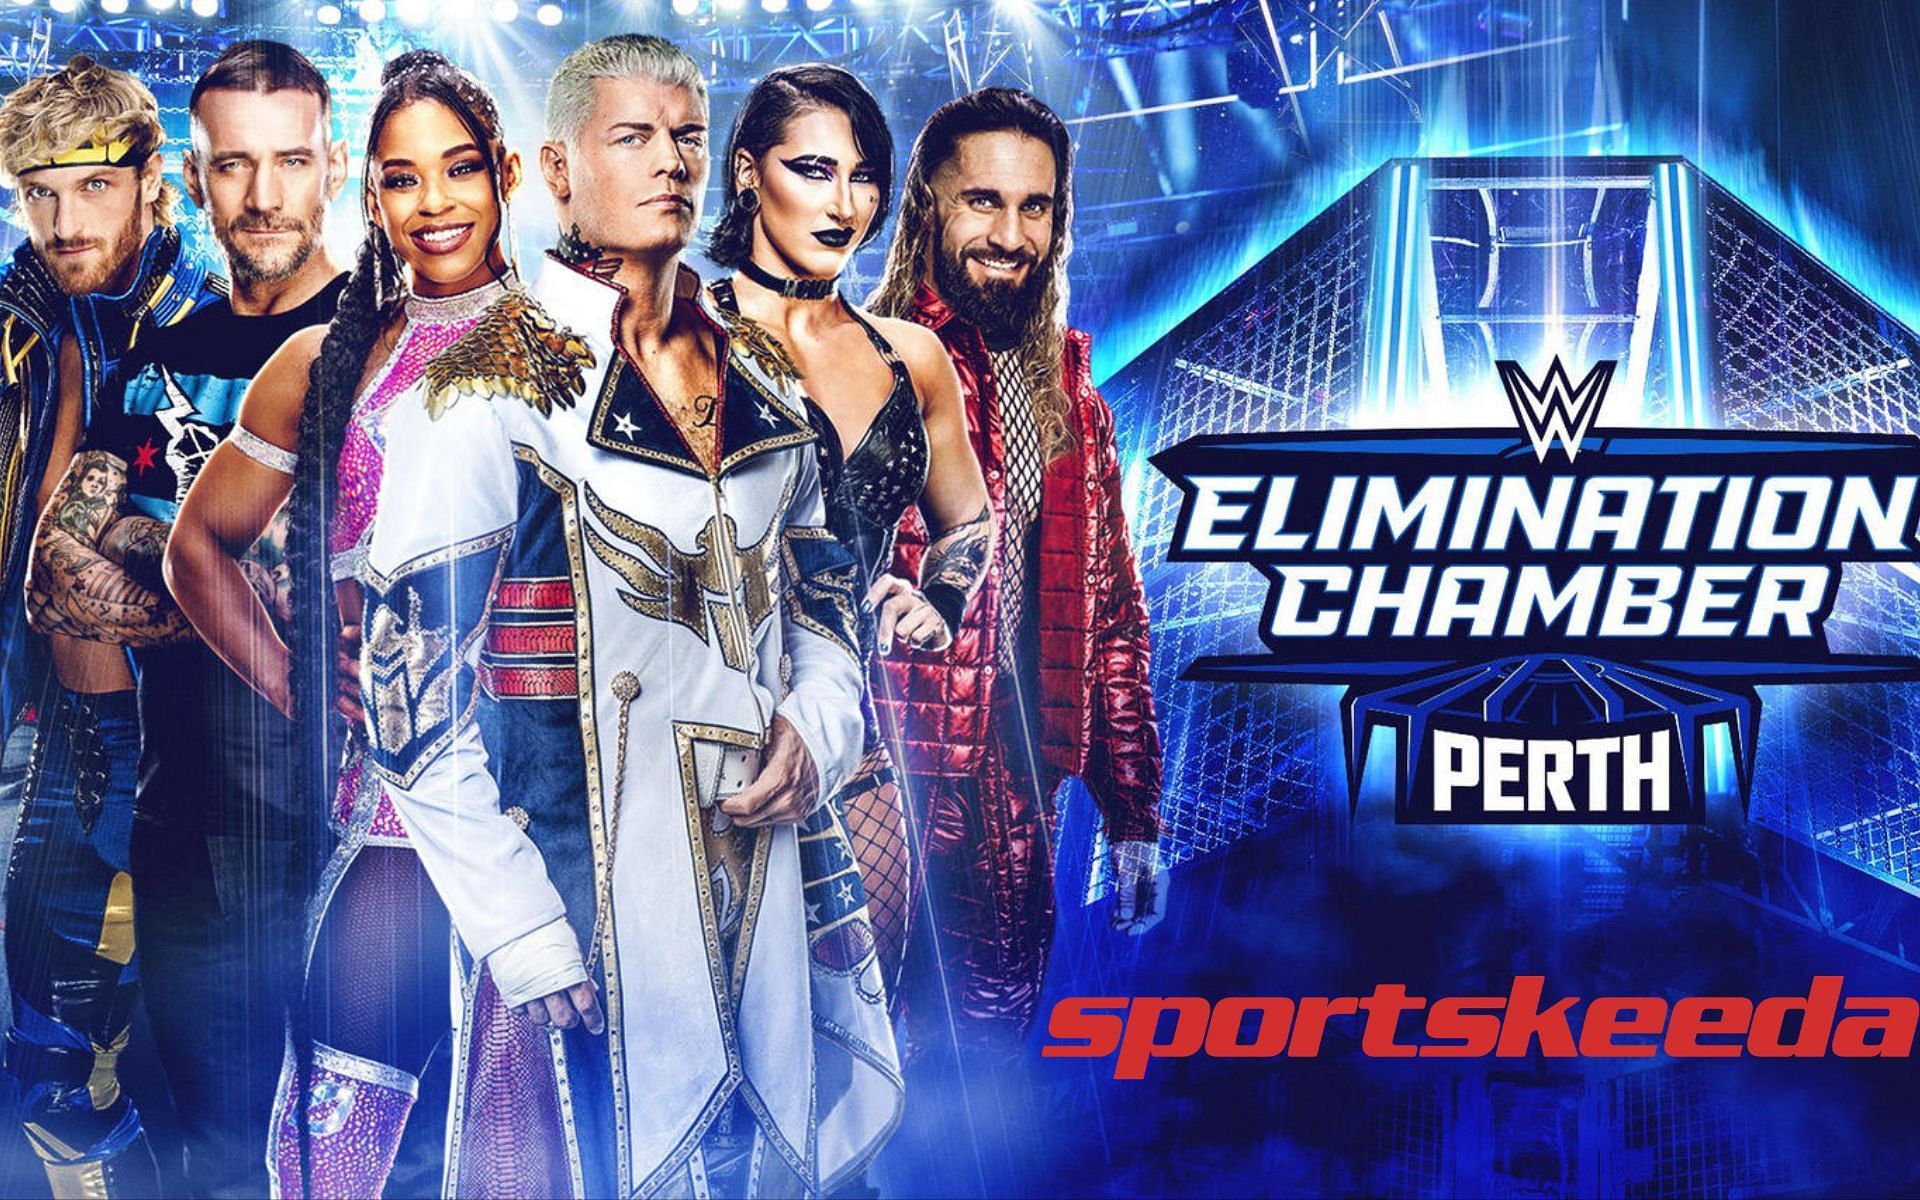 The Elimination Chamber heads down under this year!